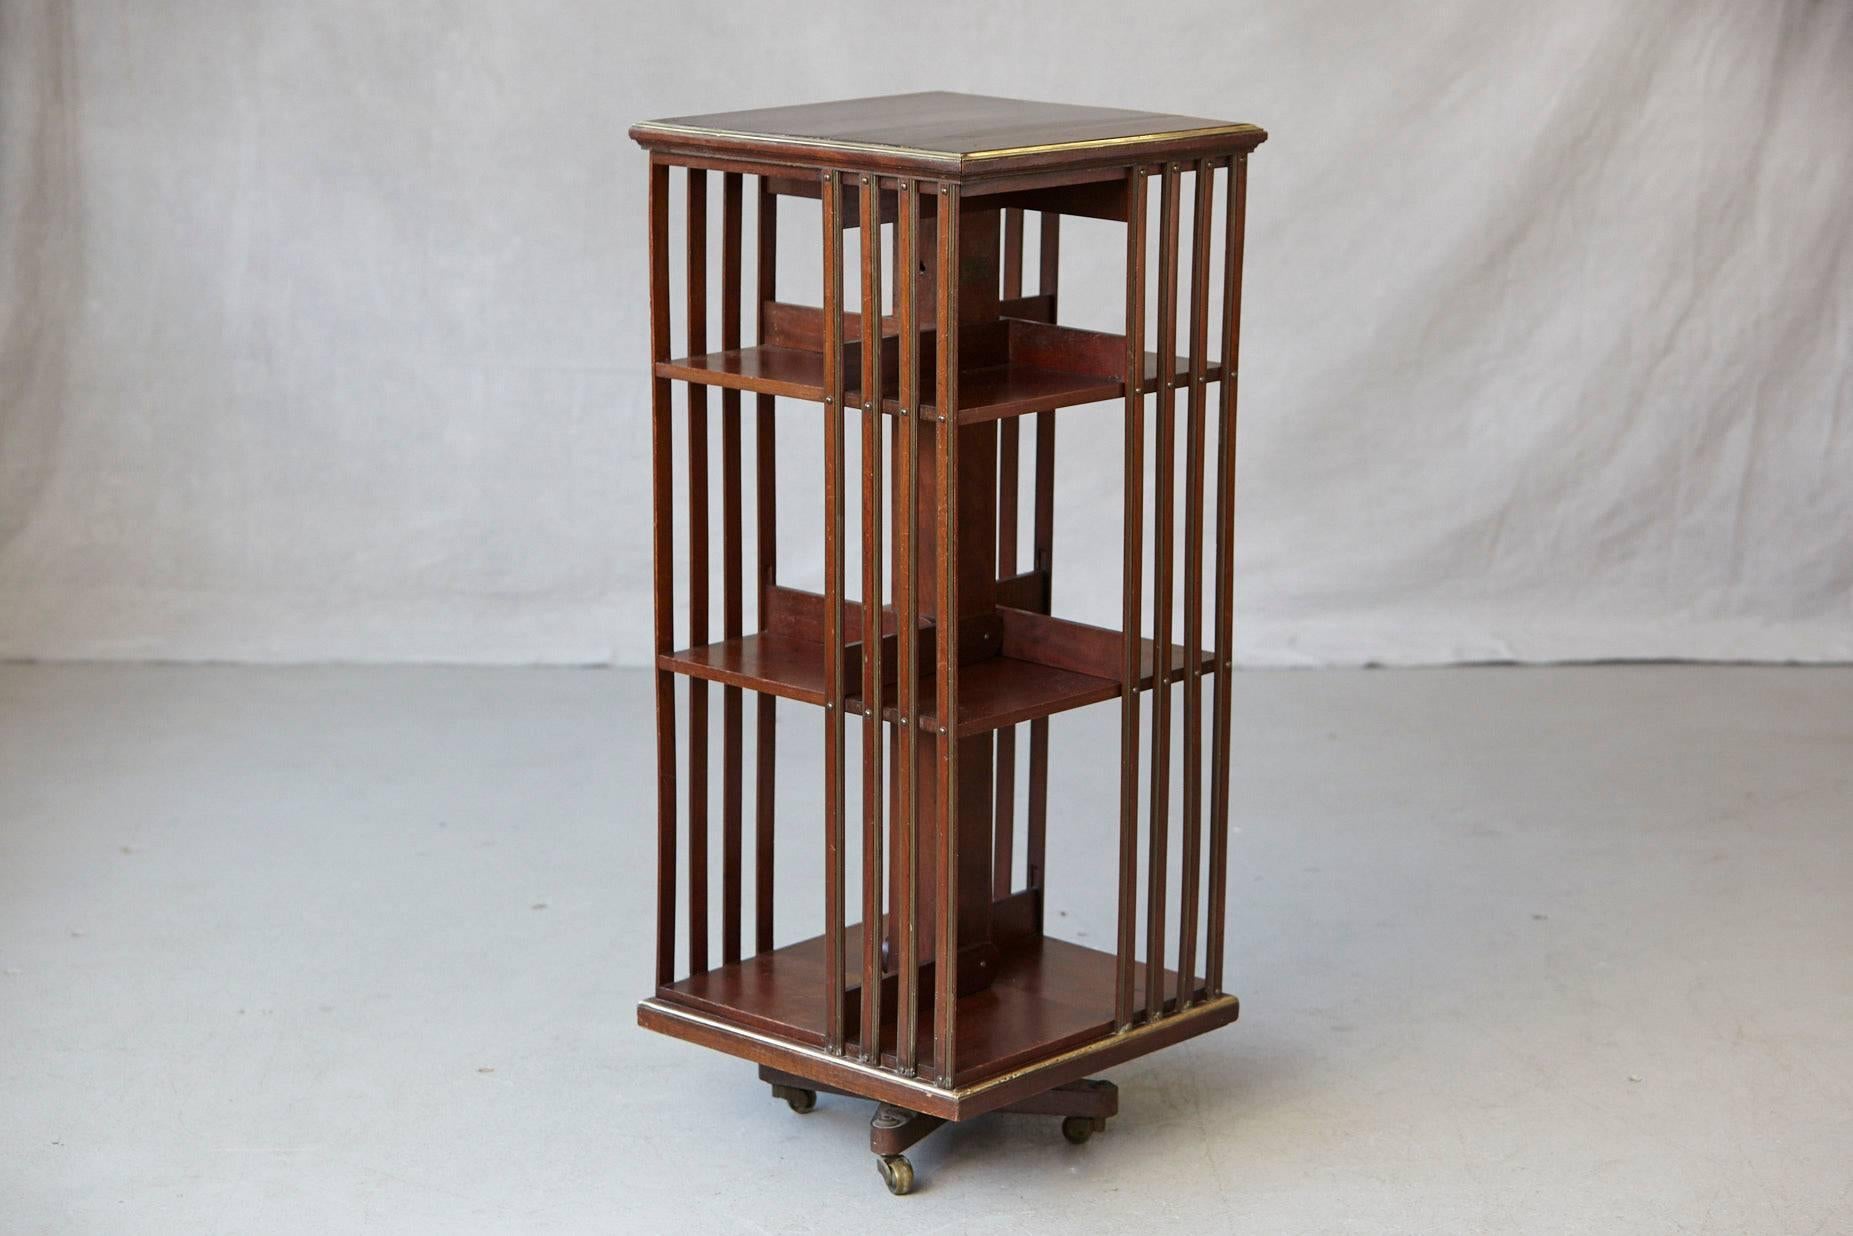 Late 19th Century Antique French Revolving Mahogany Bookcase on Raised Casters with Brass Trim